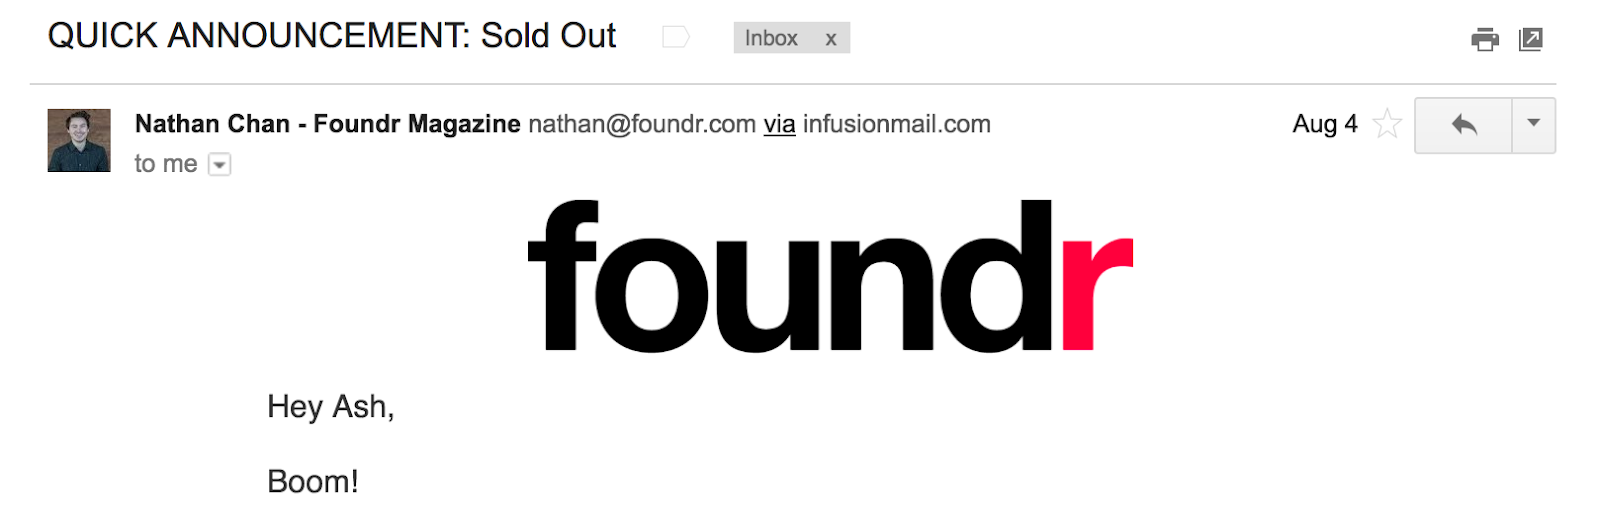 Best Email Subject Lines: Screenshot of email from Foundr